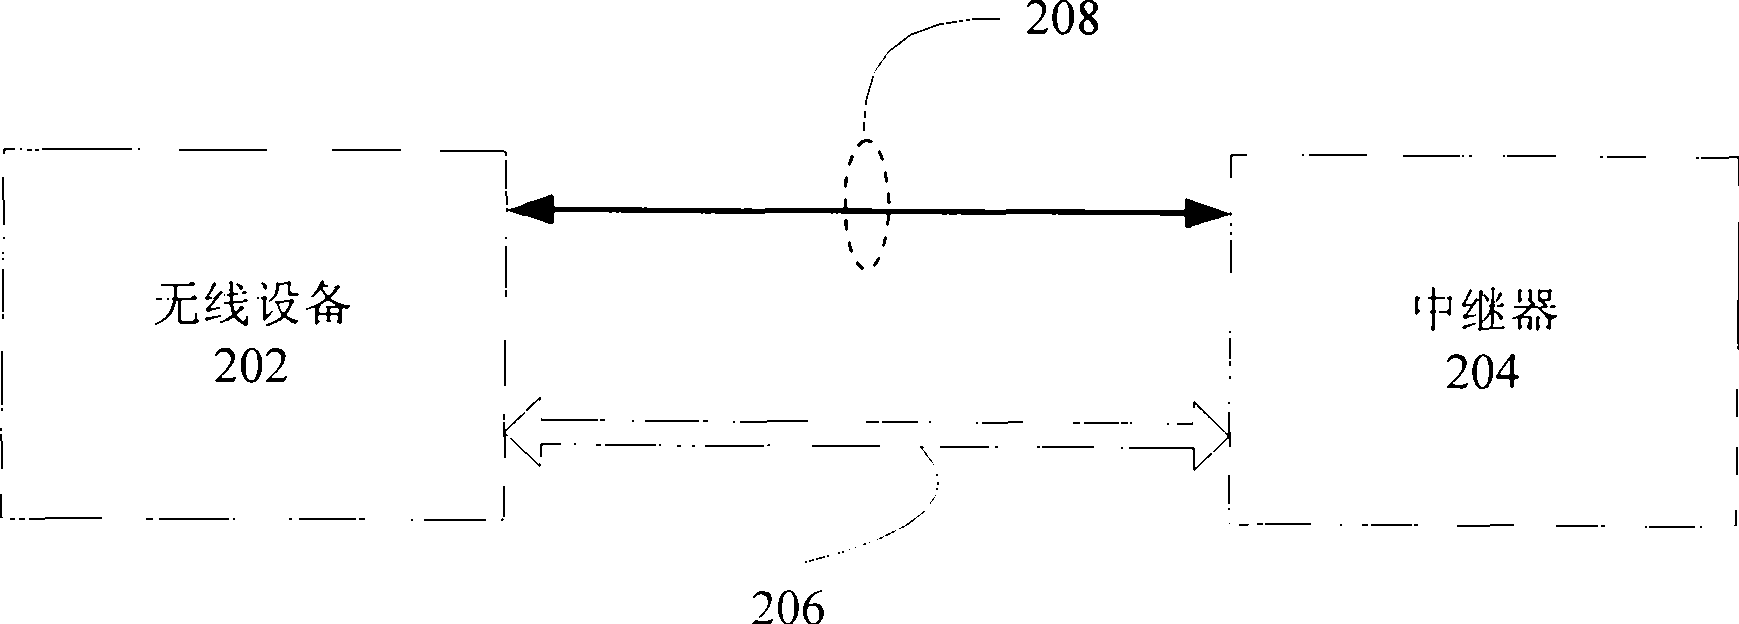 Method for utilizing ehf repeaters for detecting and/or tracking an entity